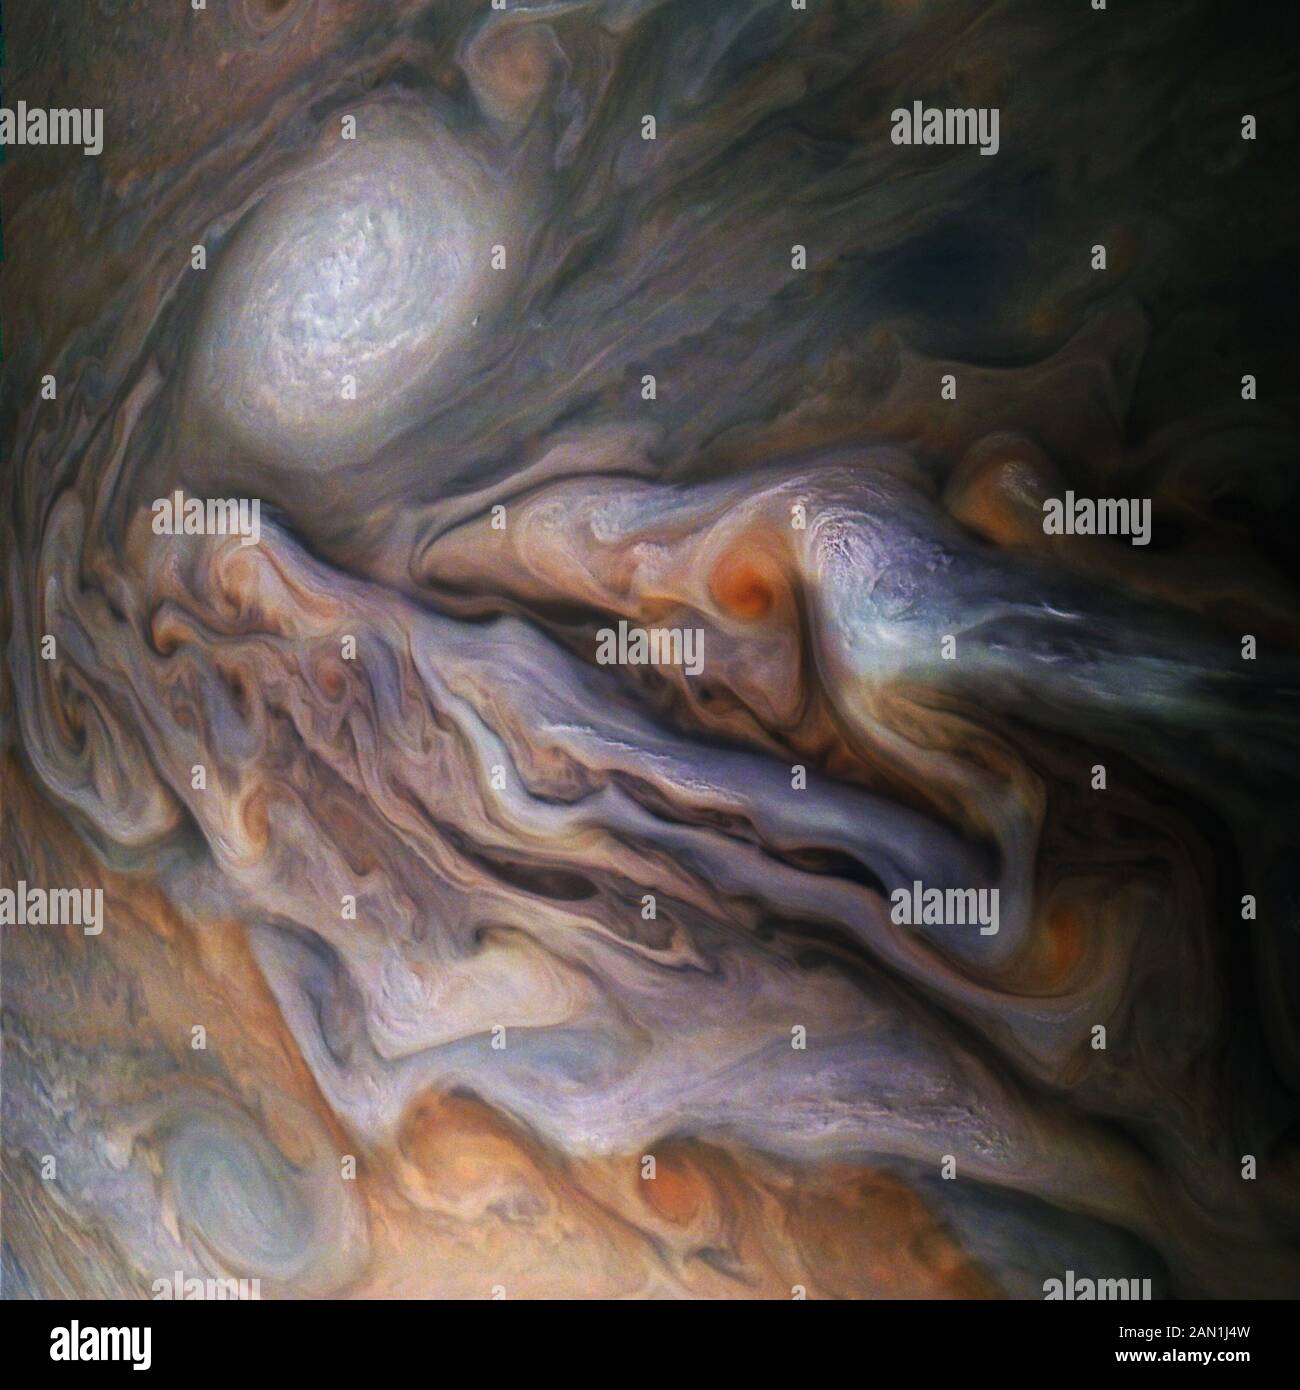 JUPITER - 2018 - A multitude of swirling clouds in Jupiter's dynamic North North Temperate Belt is captured in this image from NASA's Juno spacecraft. Stock Photo